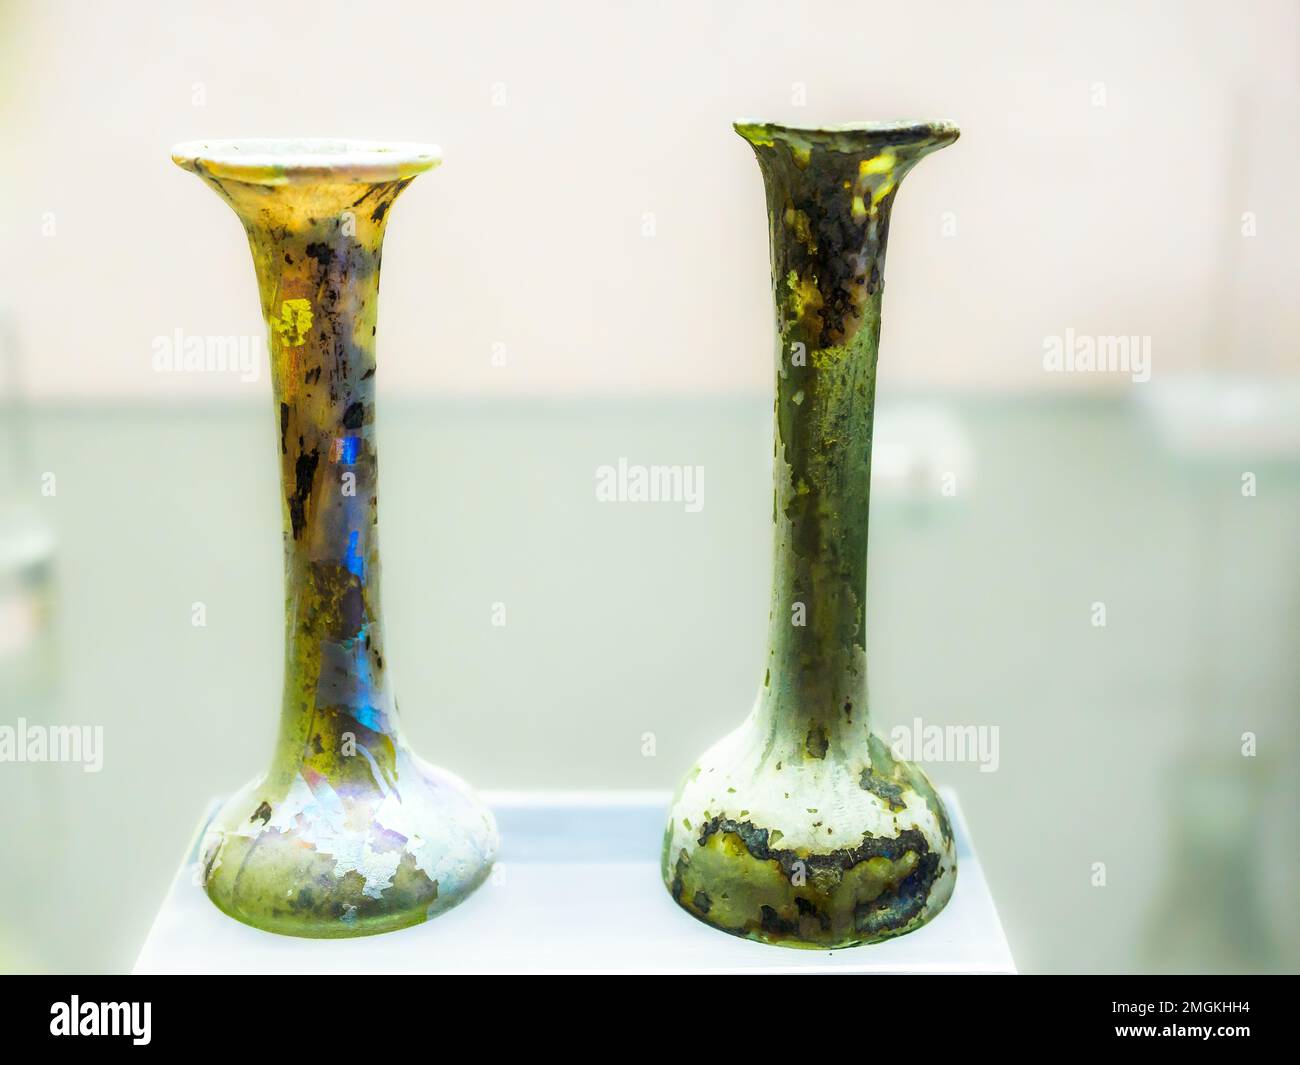 Candle ointments. 5th-6th century AD - Museo Archeologico Regionale Paolo Orsi - Syracuse, Sicily, Italy Stock Photo